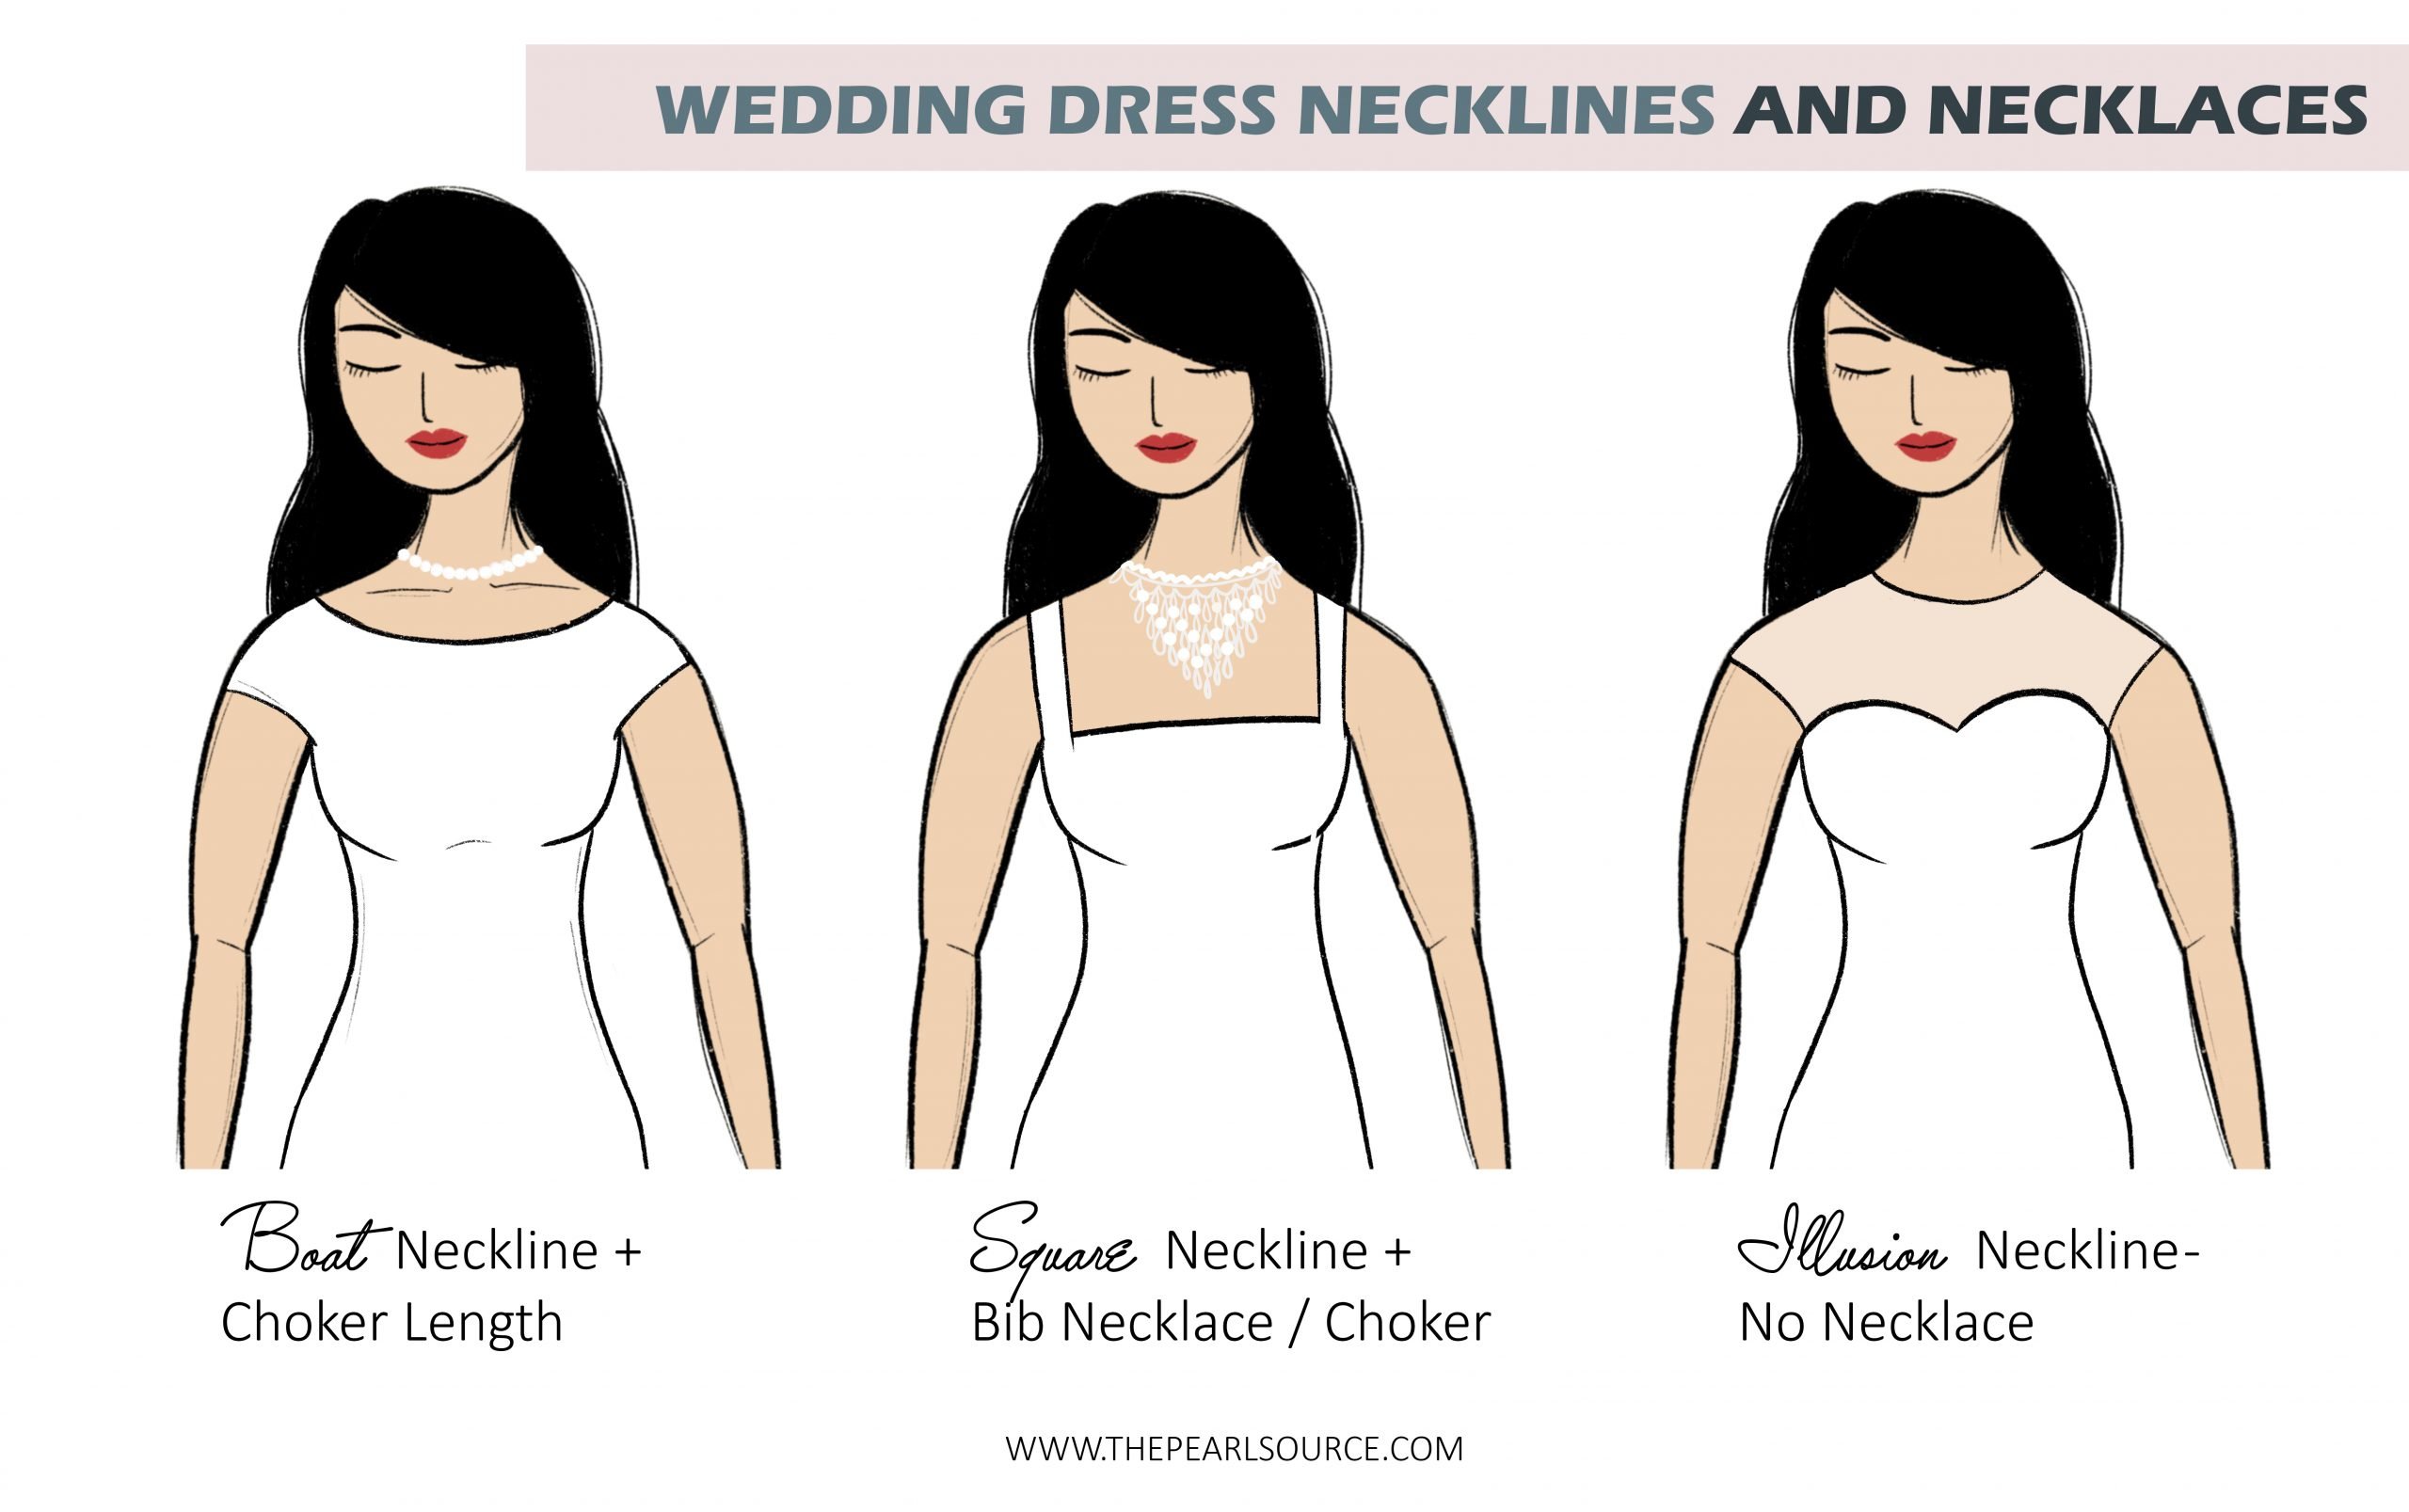 Necklace Designs For Specific Blouse Necklines